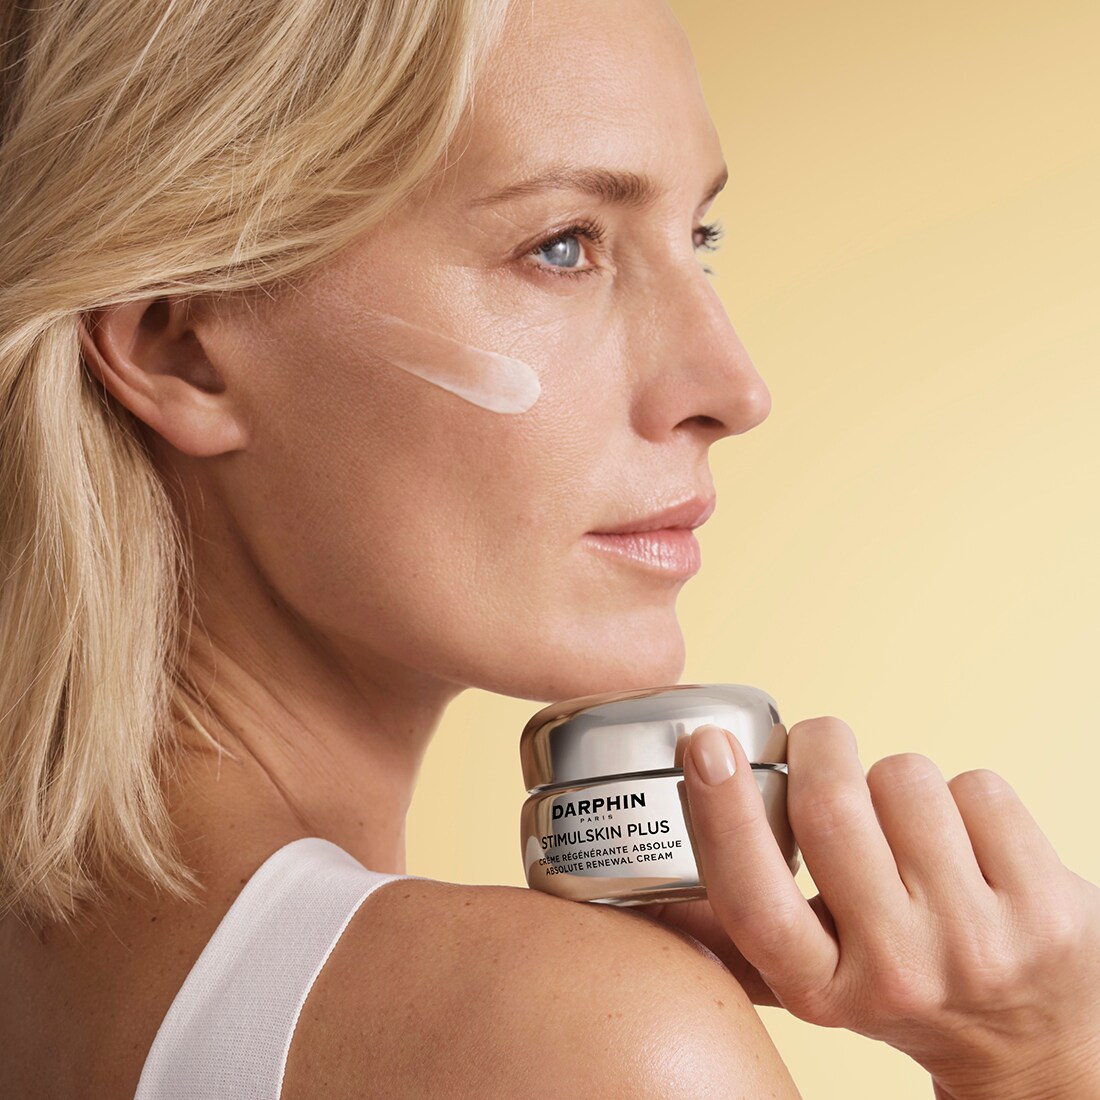 Woman holding skincare product